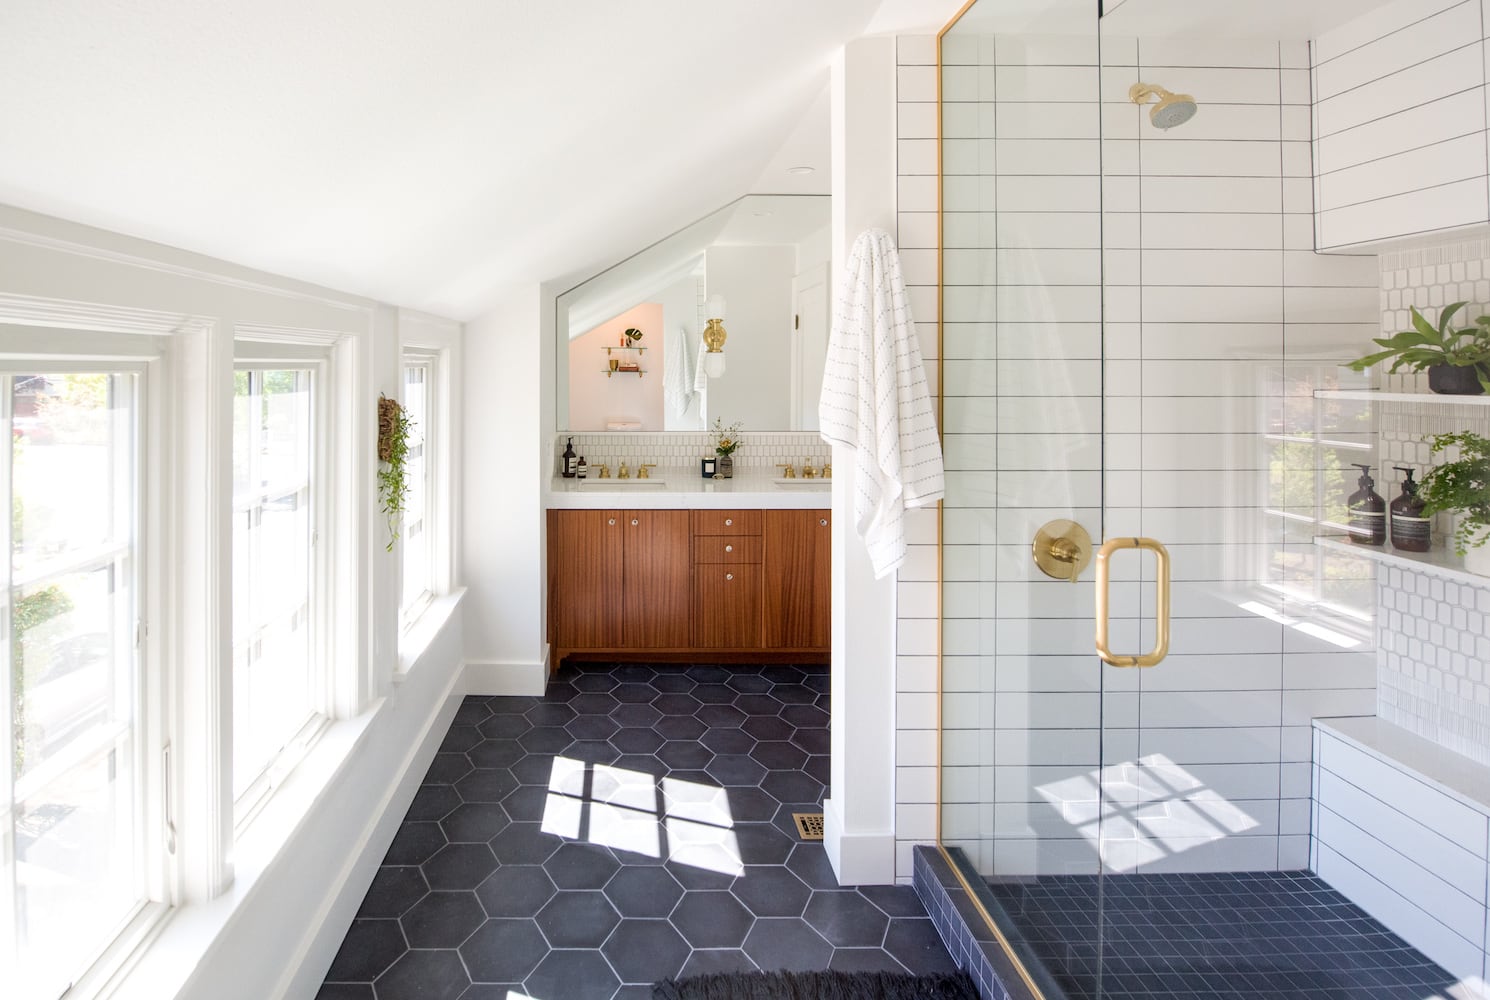 Primary upstairs bathroom transformation in Portland created by smart space planning